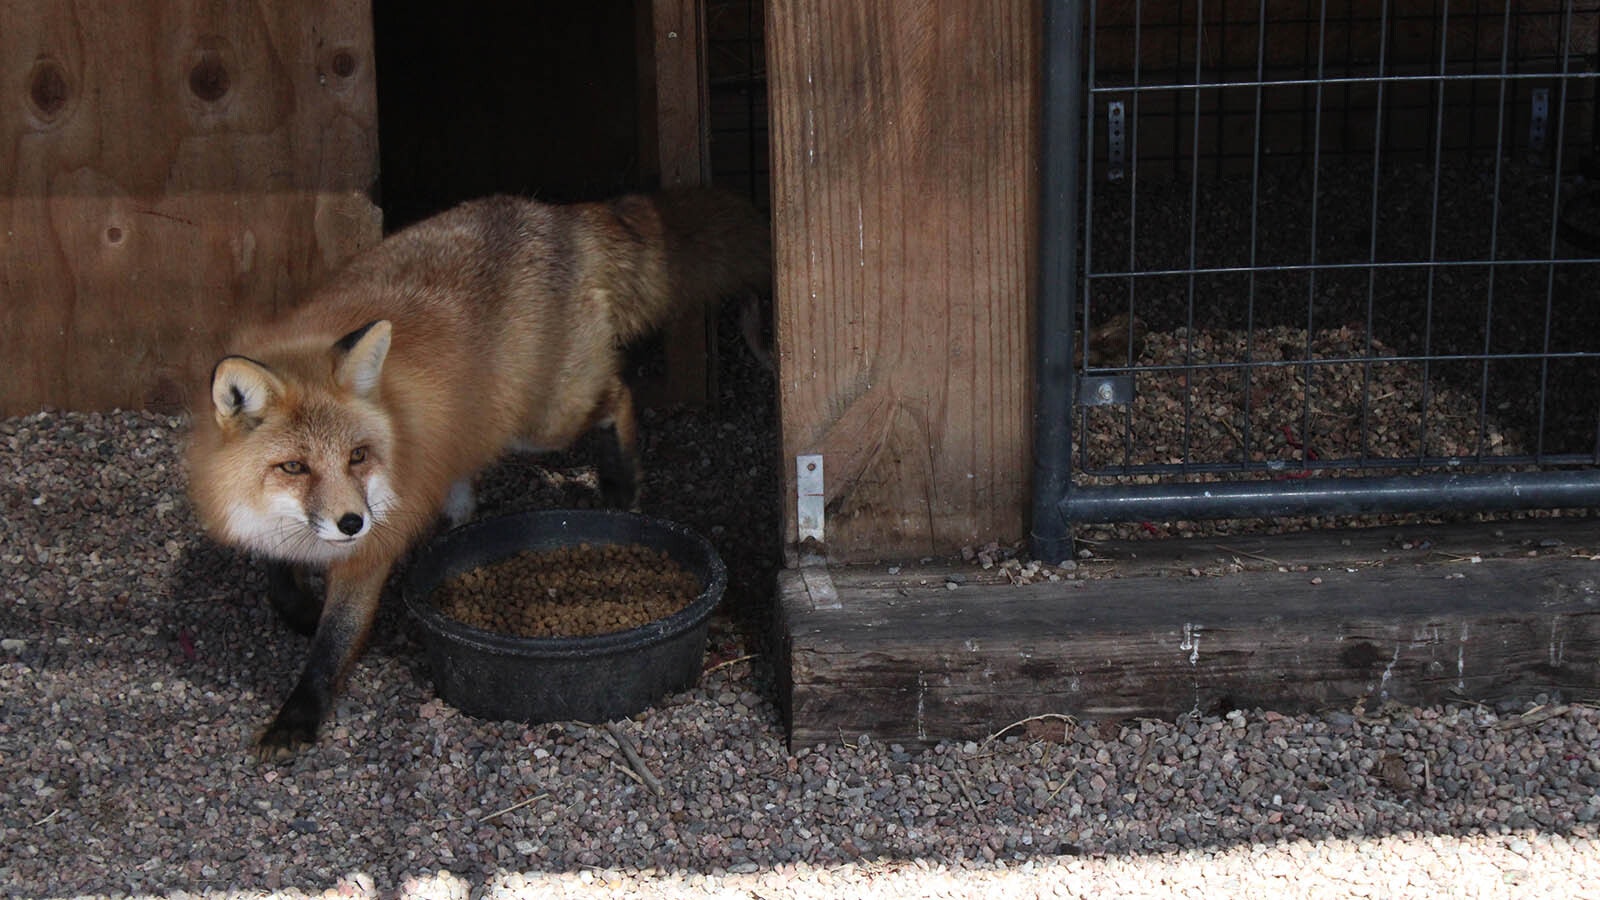 Vixen is a blind fox that lives at the Broken Bandit Wildlife Center east of Cheyenne.